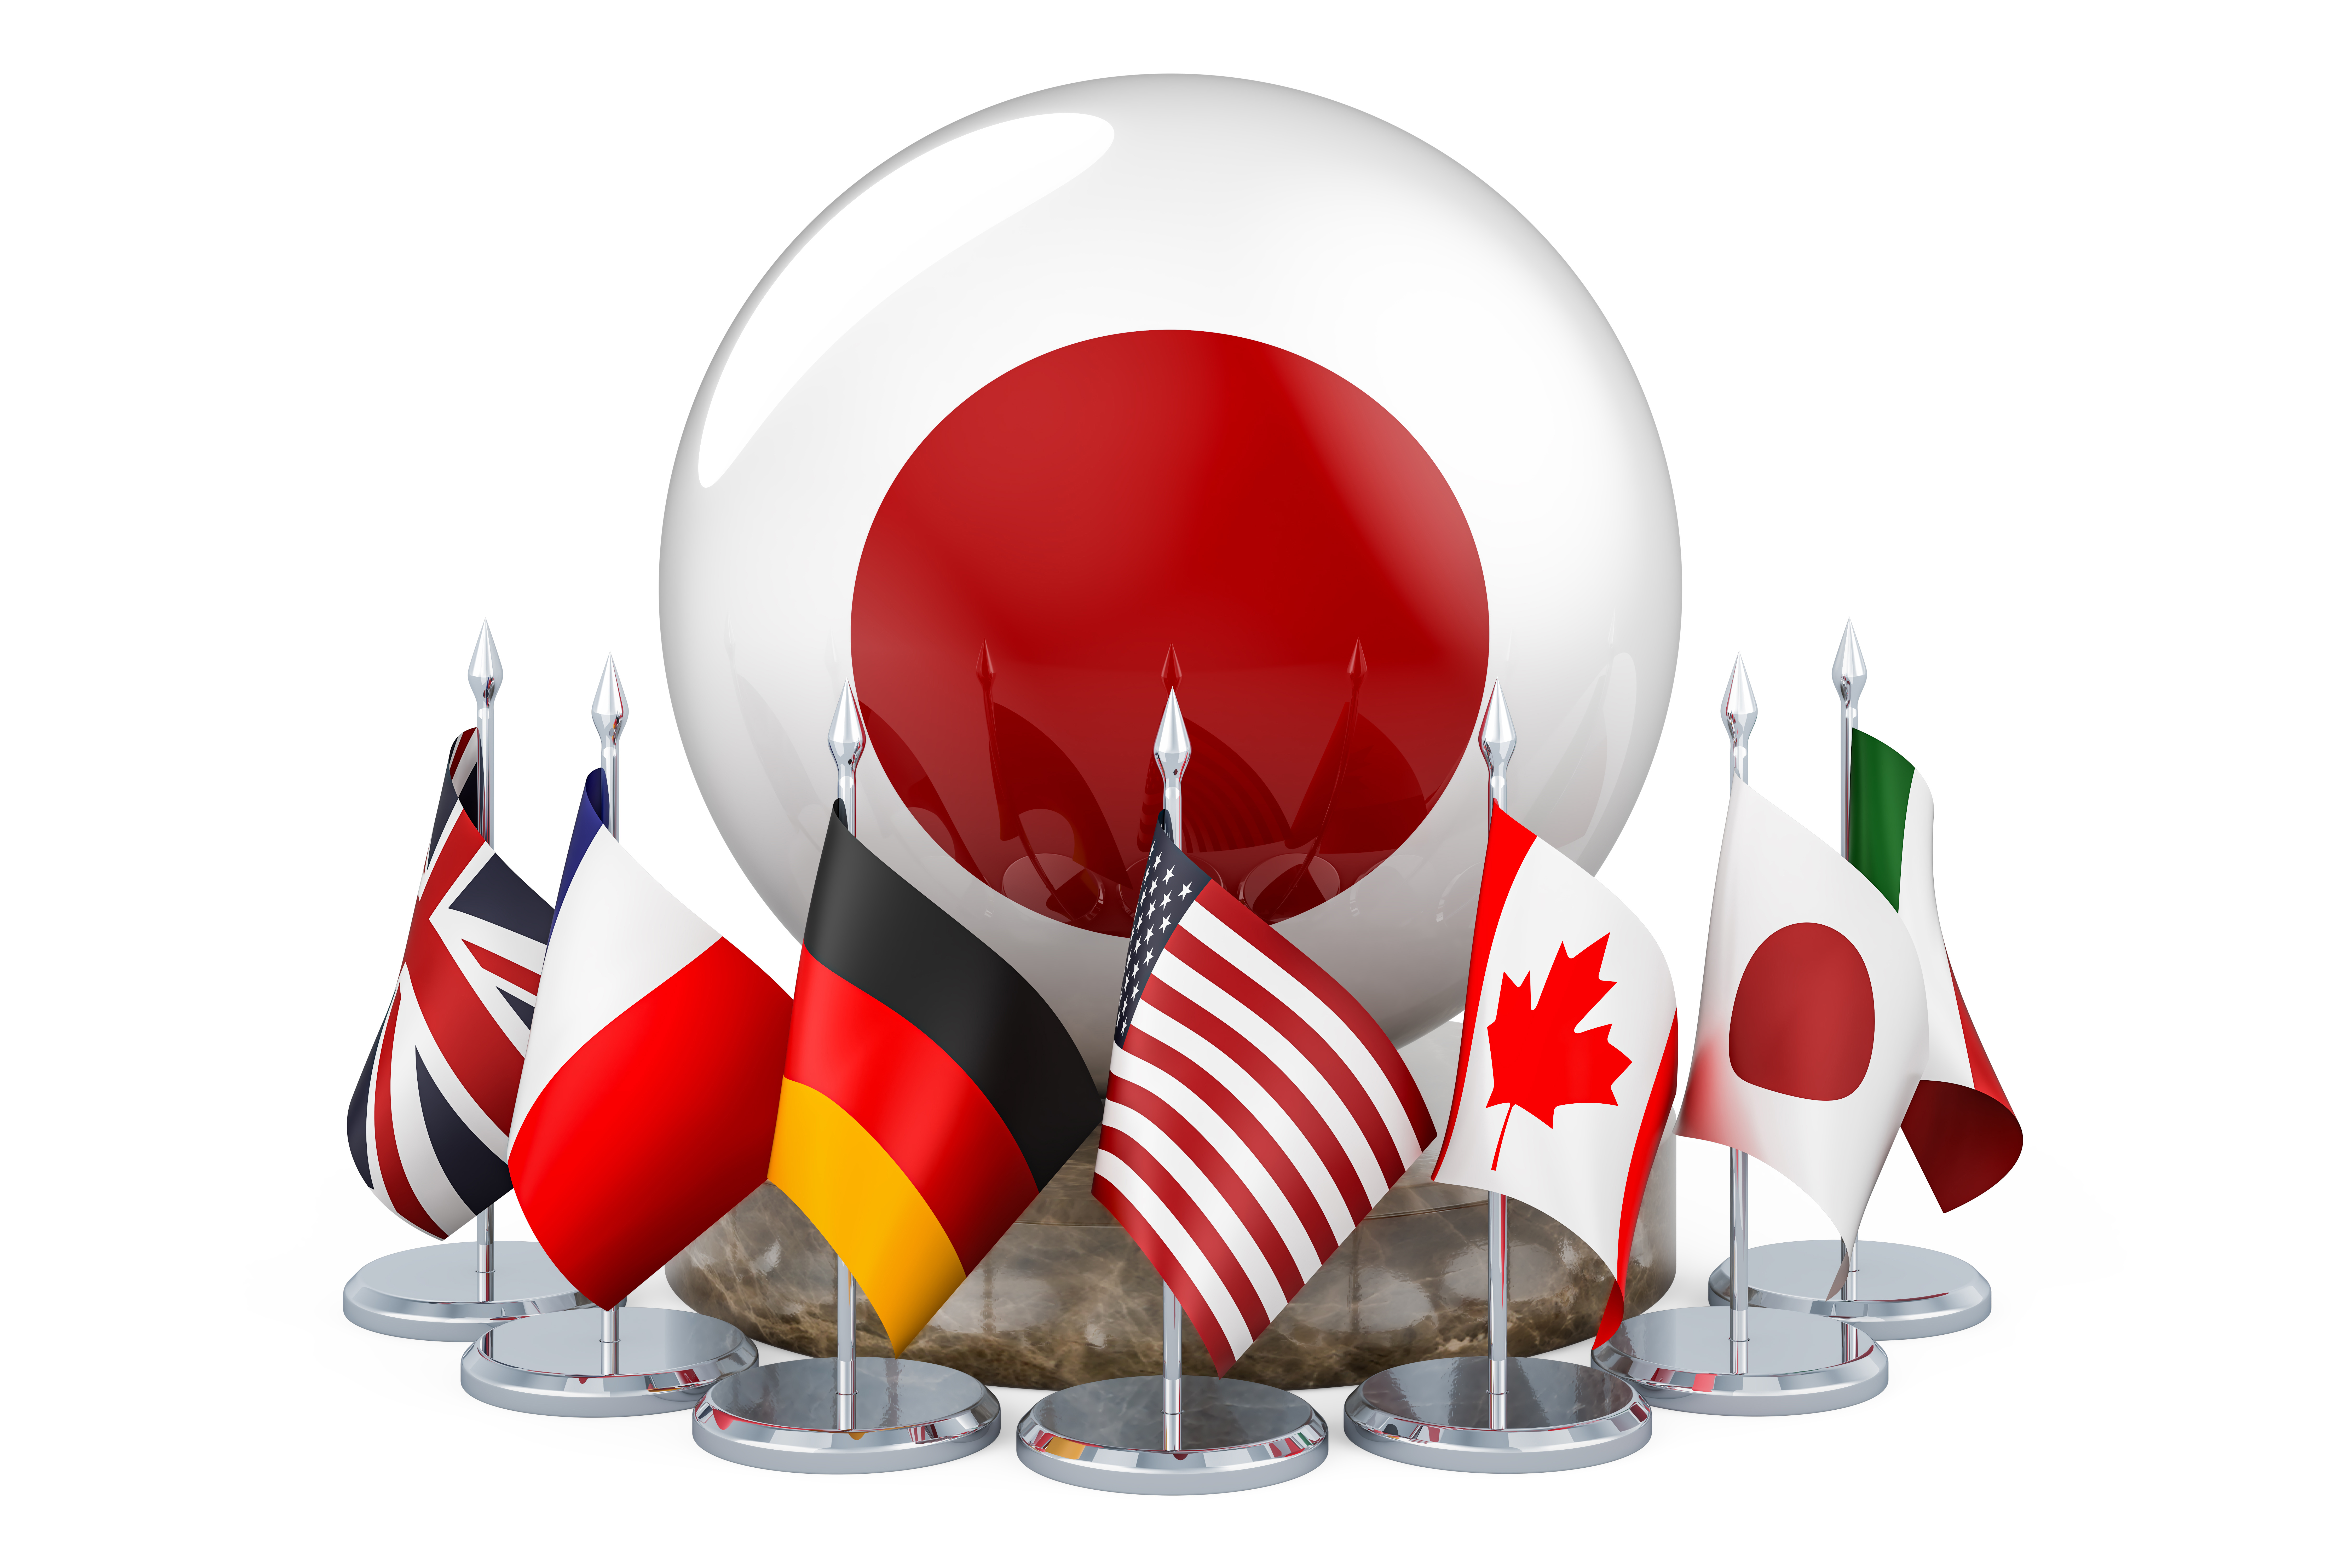 The flags of the G7 nations surround the sphere decorated in the colors of the Japanese flag.